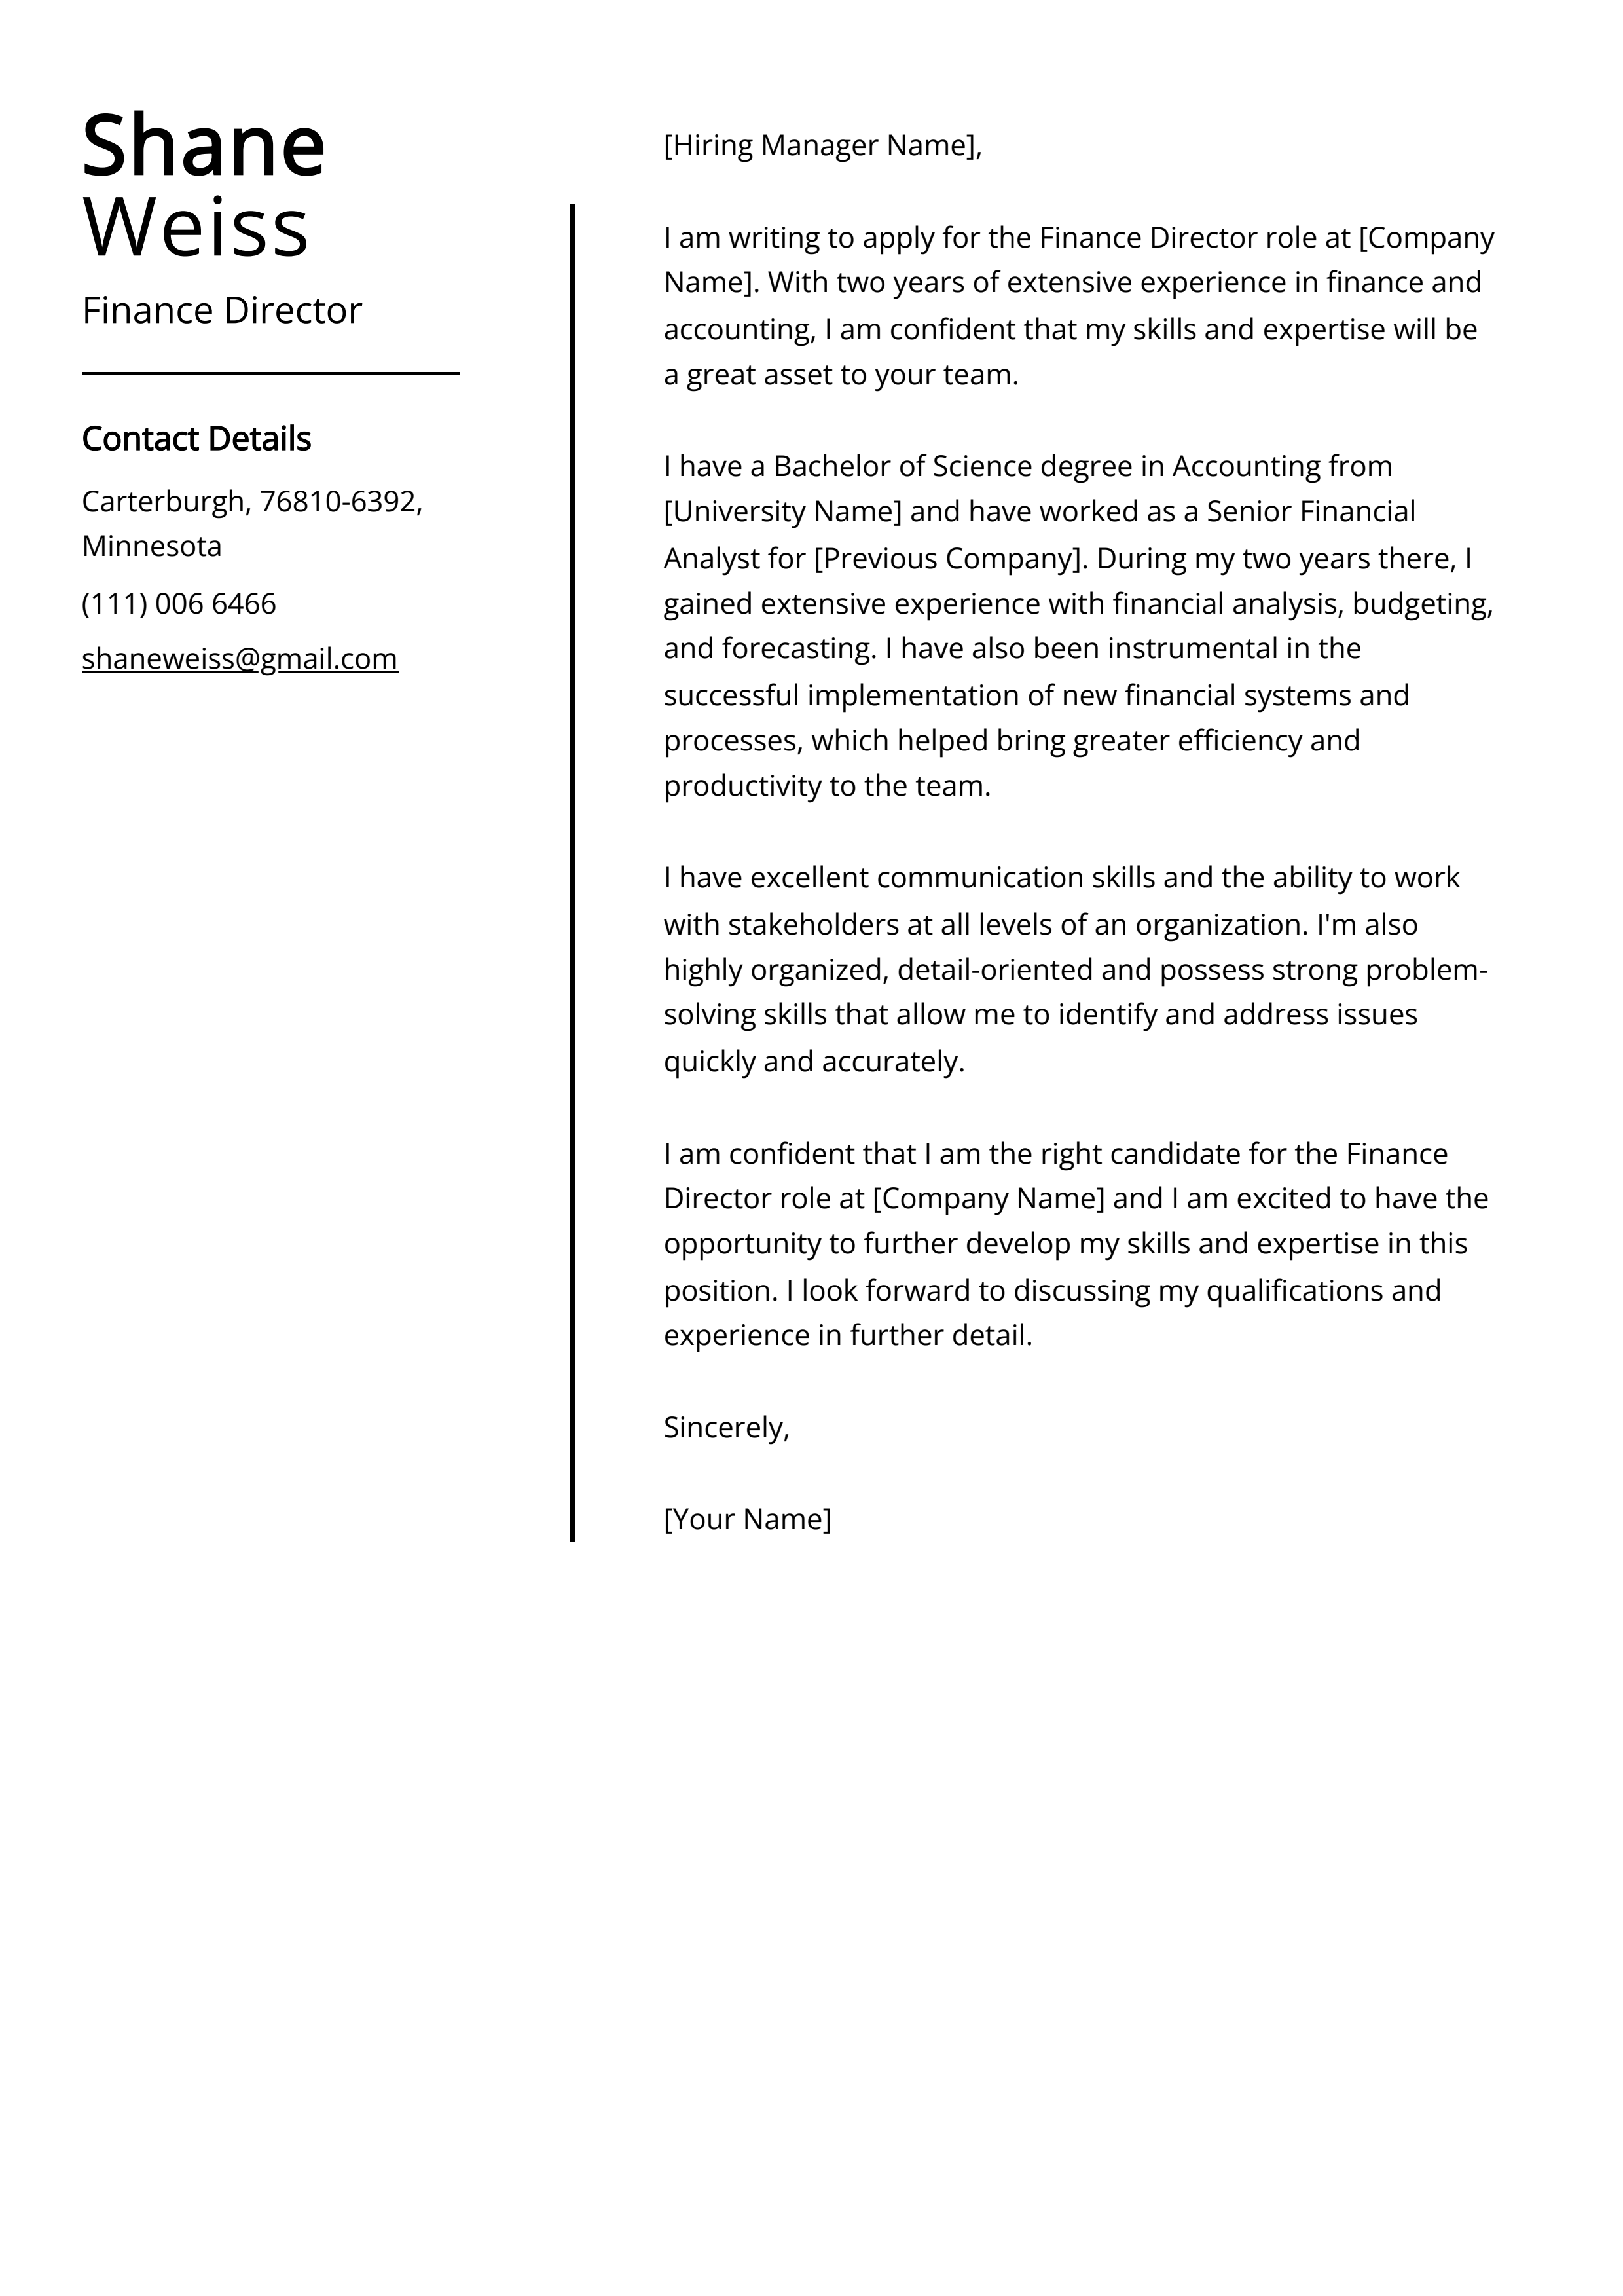 Finance Director Cover Letter Example